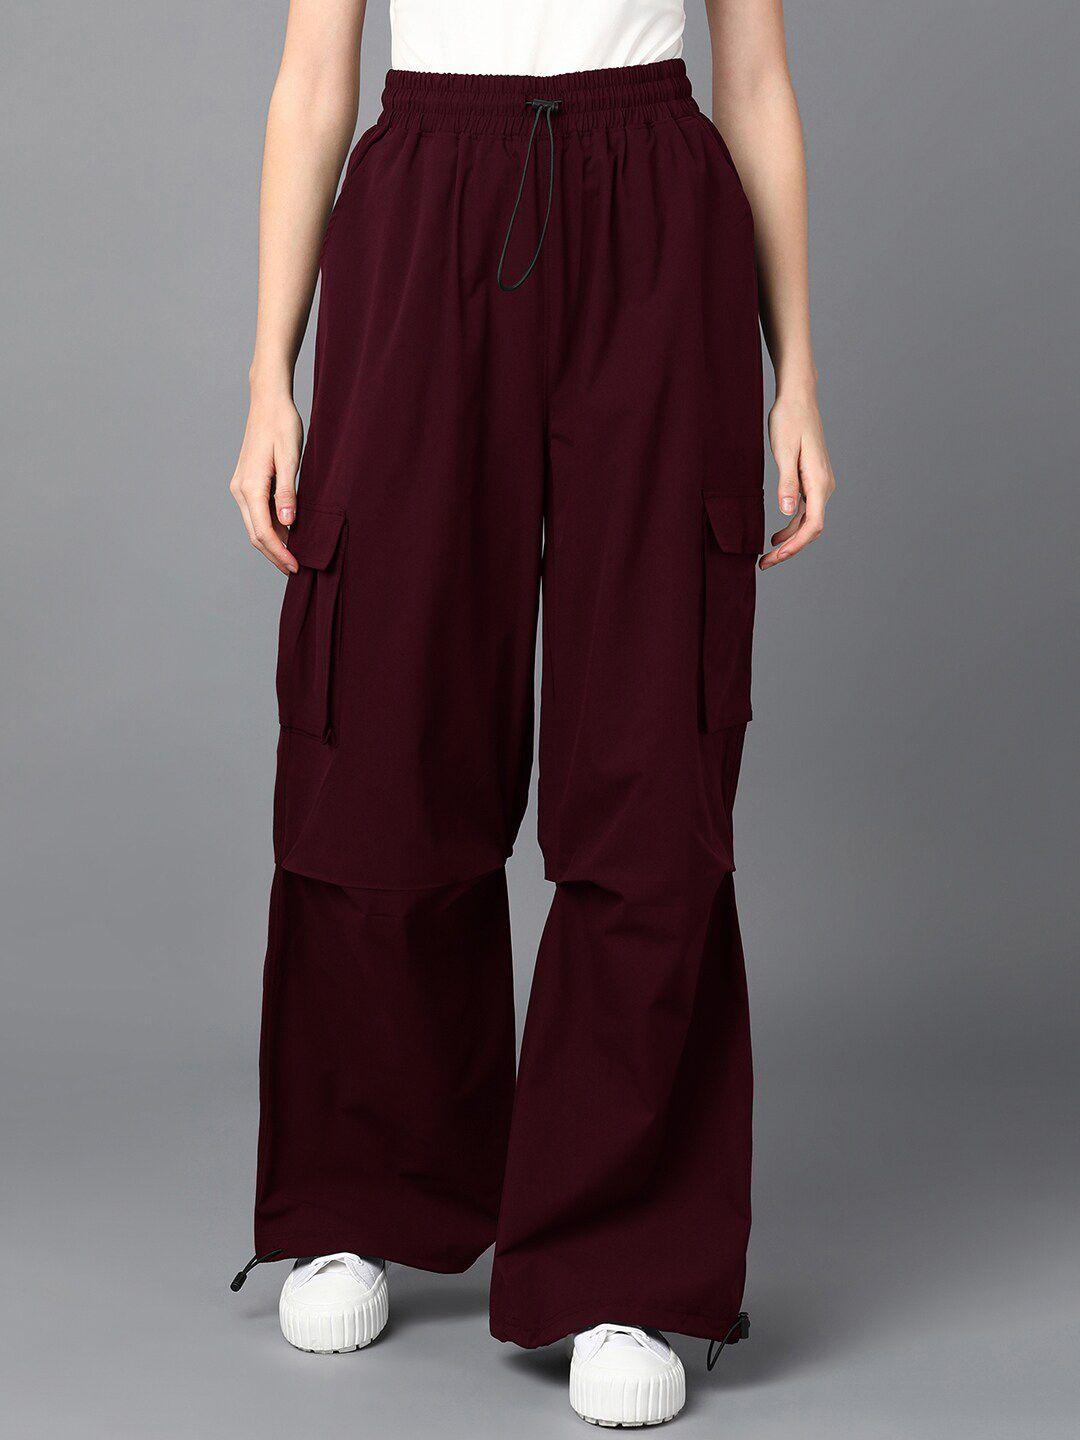 roadster-women-mid-rise-baggy-fit-track-pants